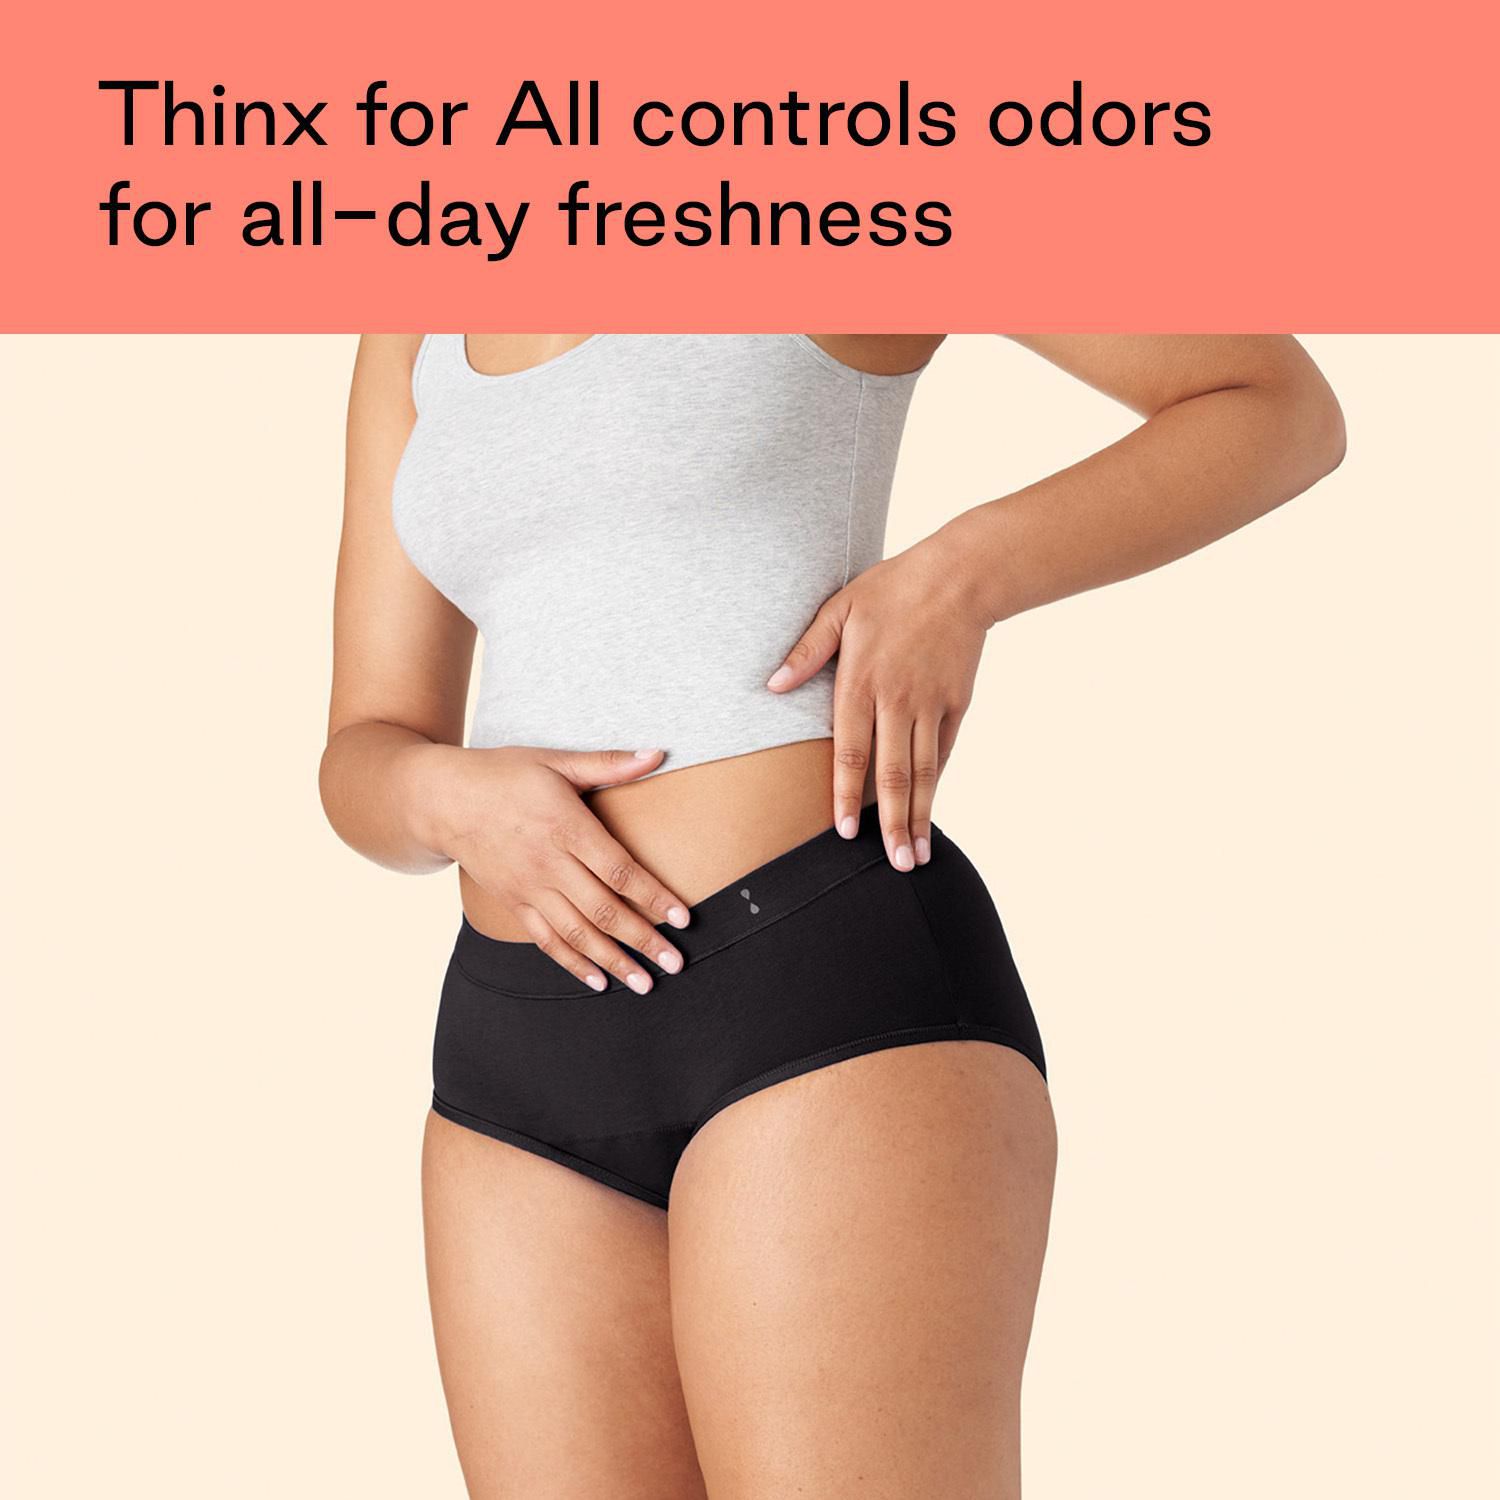  Thinx for All Bikini 3-Pack Period Underwear for Women, Holds 5  Tampons, Moisture Wicking Underwear for Women, Period Panties, Black, Large  : Health & Household